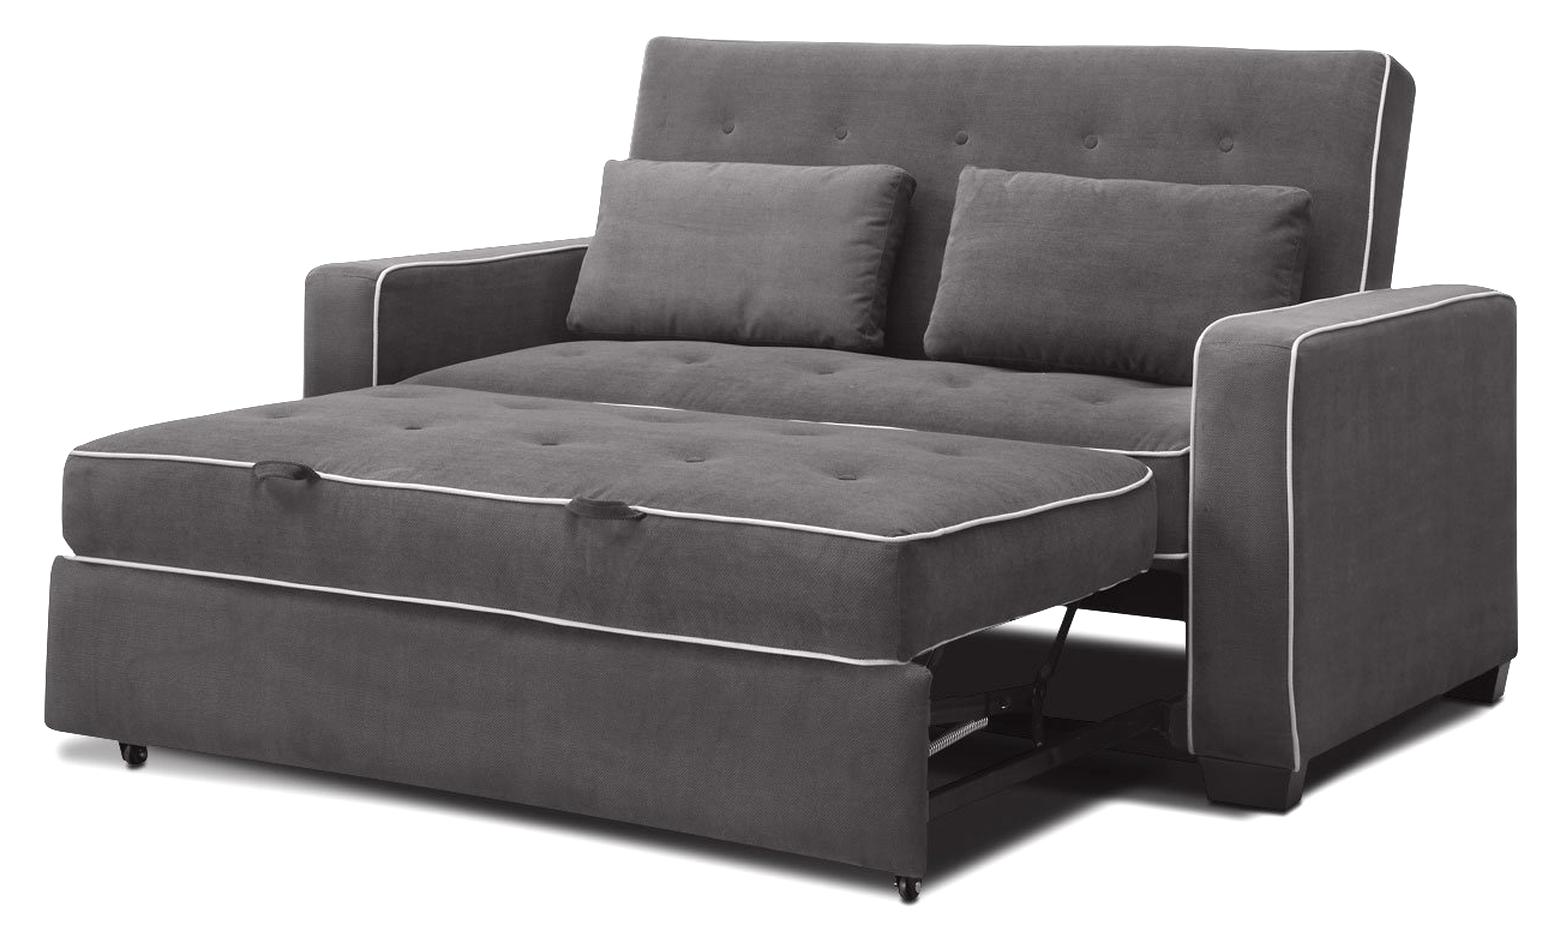 cheap sofa beds on sale